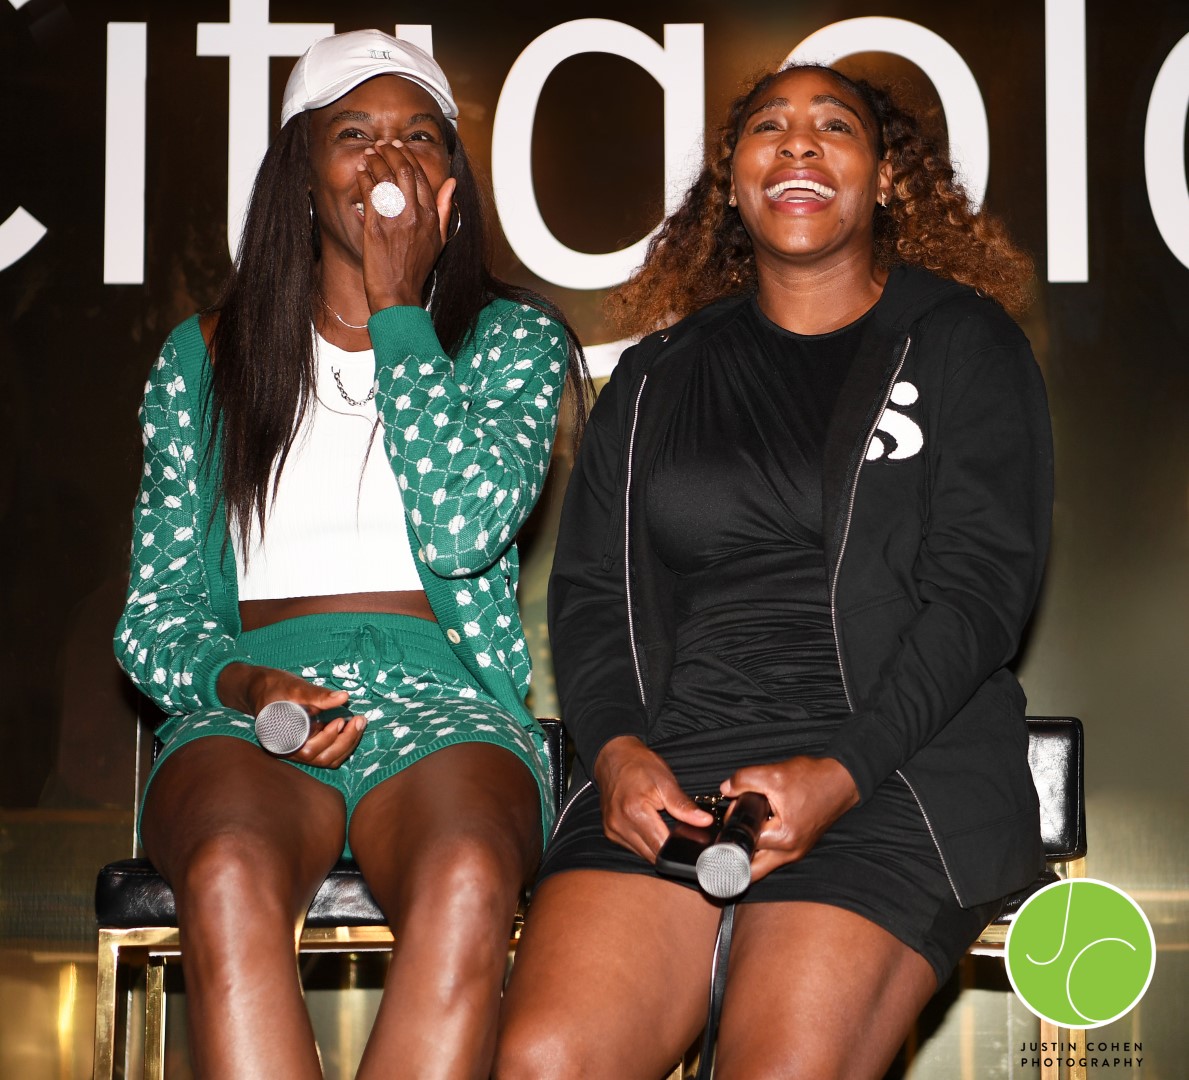 Serena and Venus Citi Taste of Tennis New York Cipriani - Justin Cohen Photography August 25, 2022